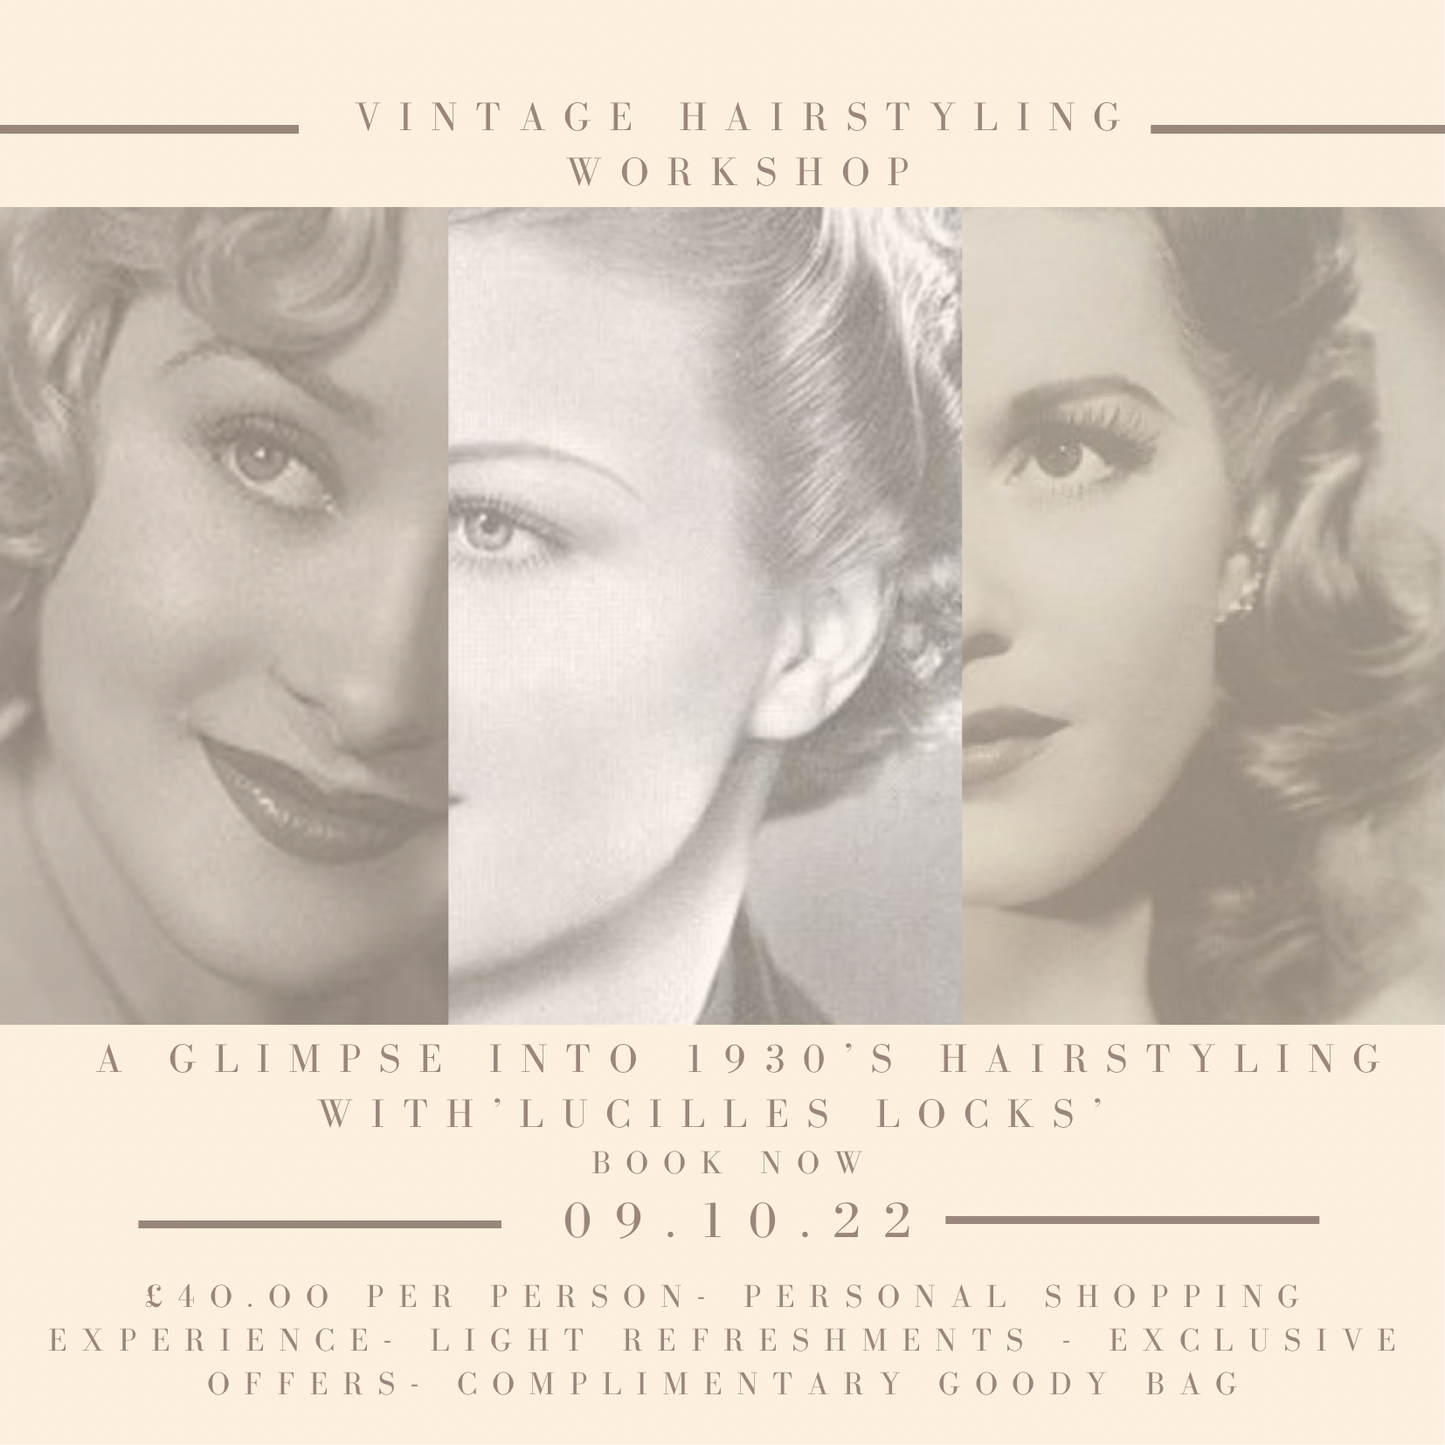 Vintage Hairstyling with ‘ Lucilles Locks’ - A Glimpse Into 1930’s Hairstyling 09.10.2022